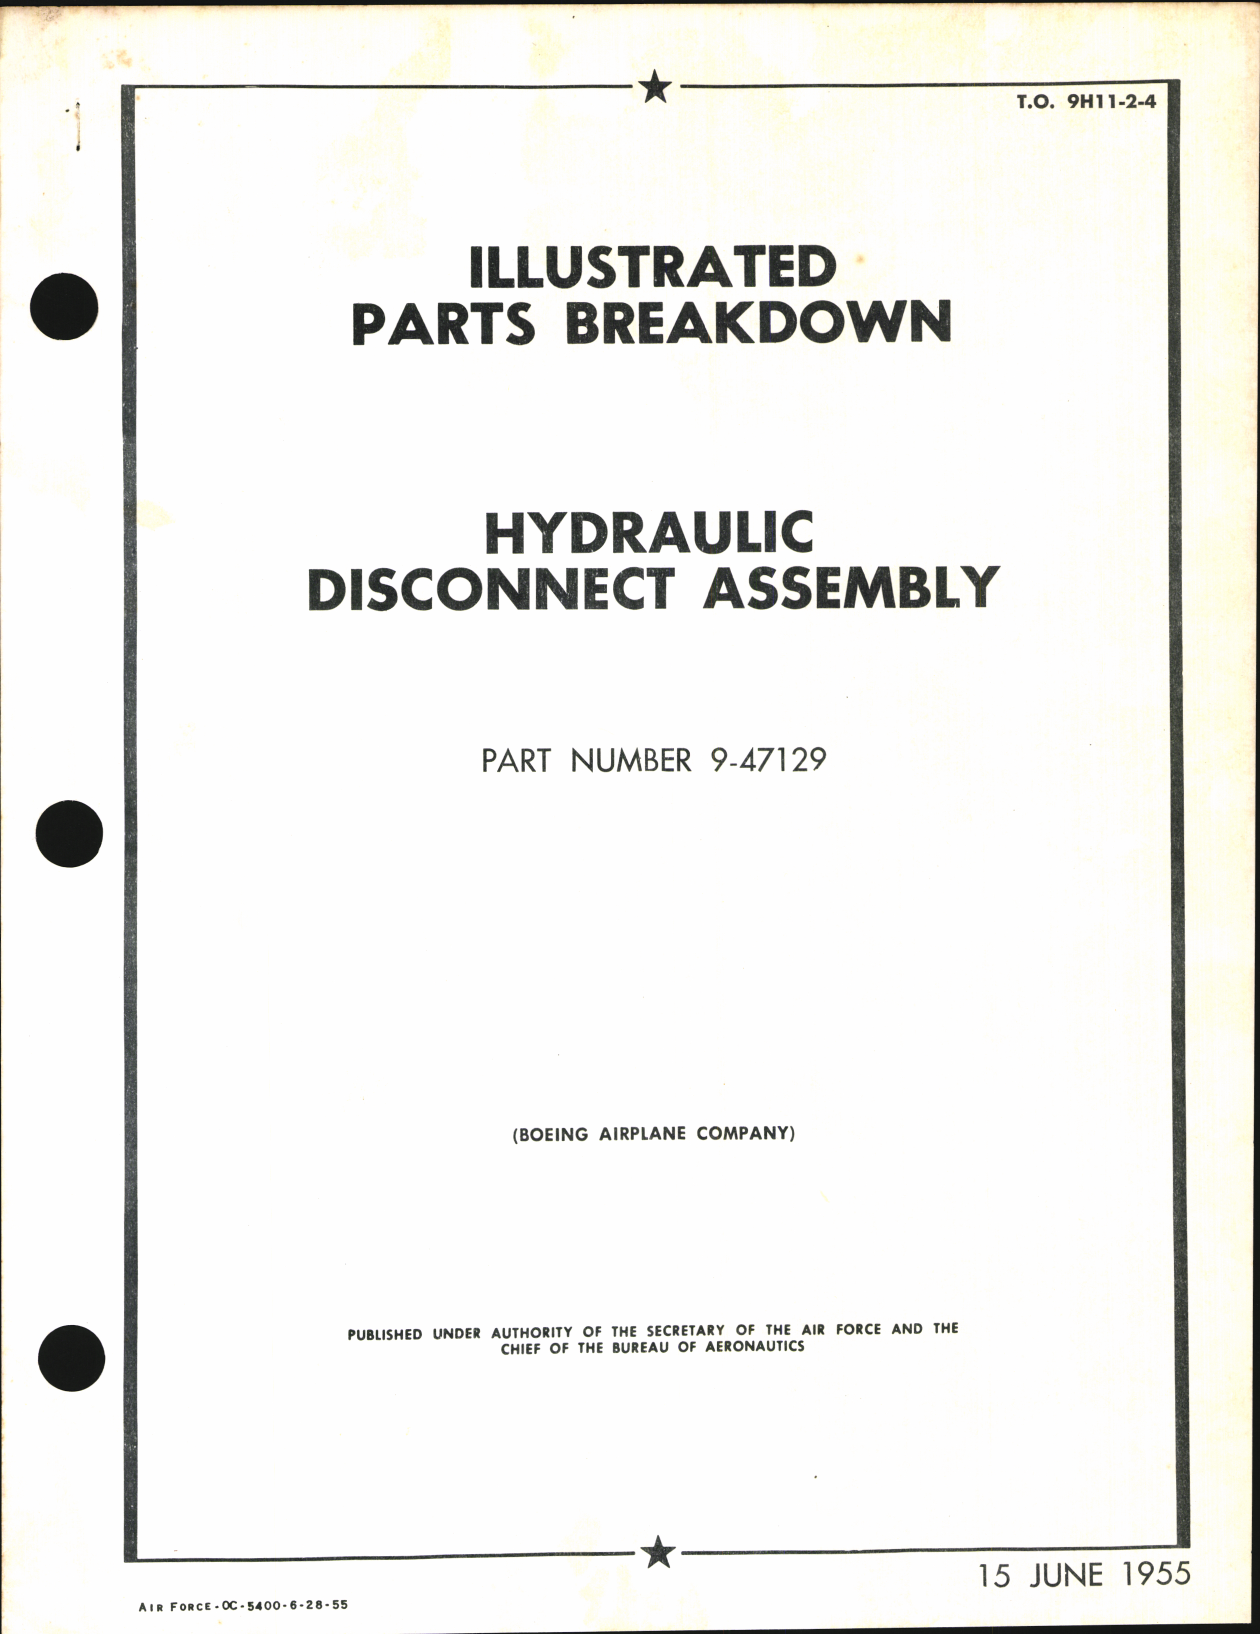 Sample page 1 from AirCorps Library document: Illustrated Parts Breakdown for Hydraulic Disconnect Assembly Part No. 9-47129